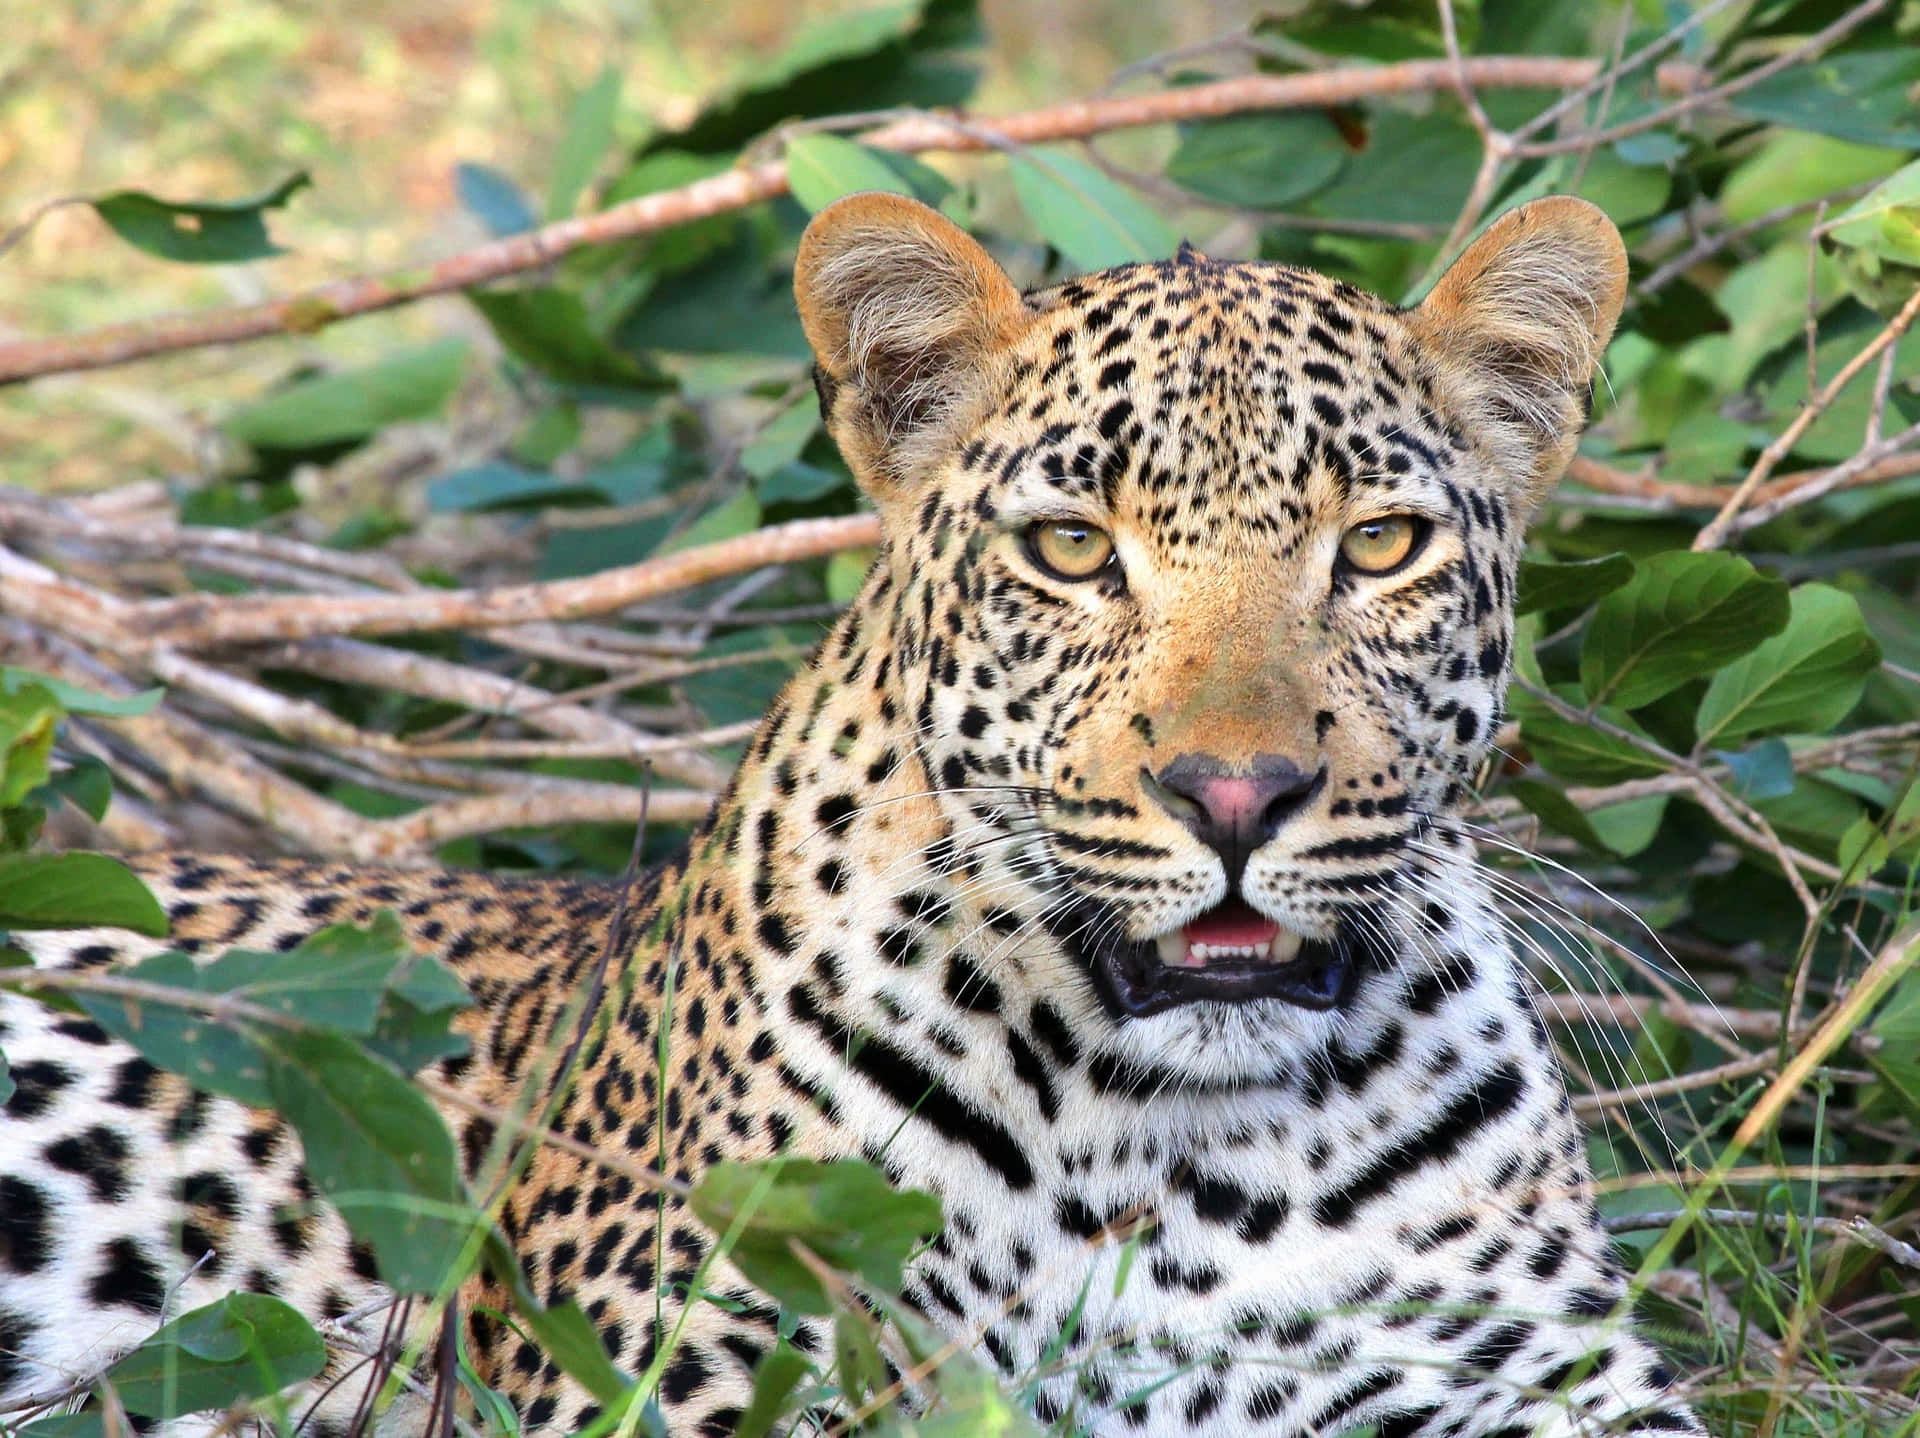 "Witness an African Safari Experience with these Majestic Wild Animals"